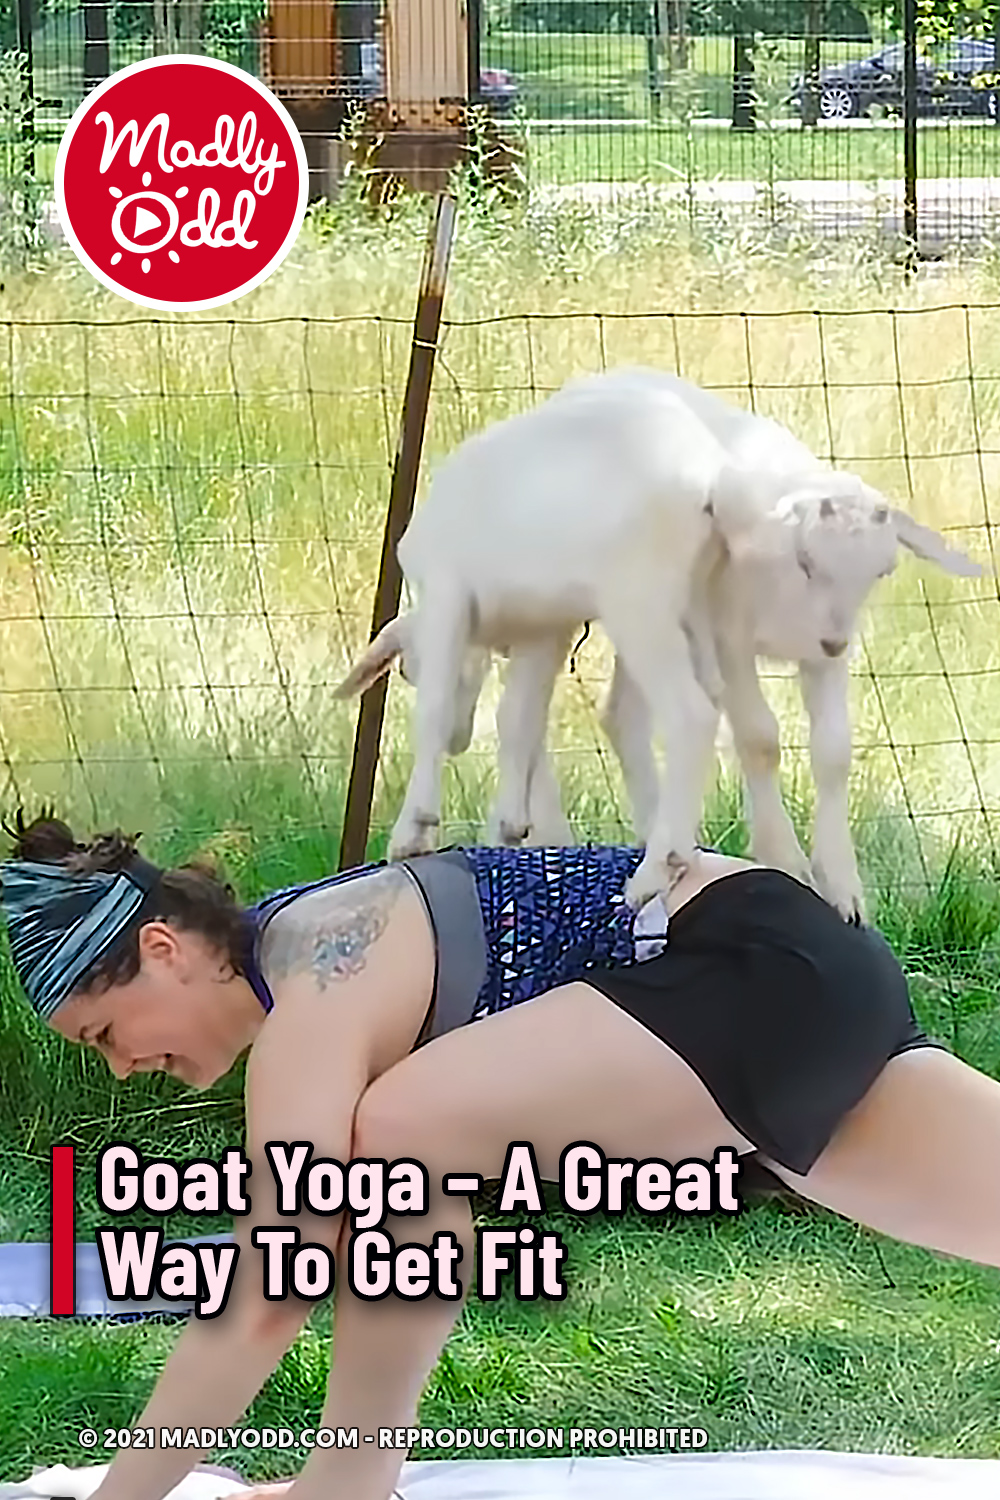 Goat Yoga - A Great Way To Get Fit